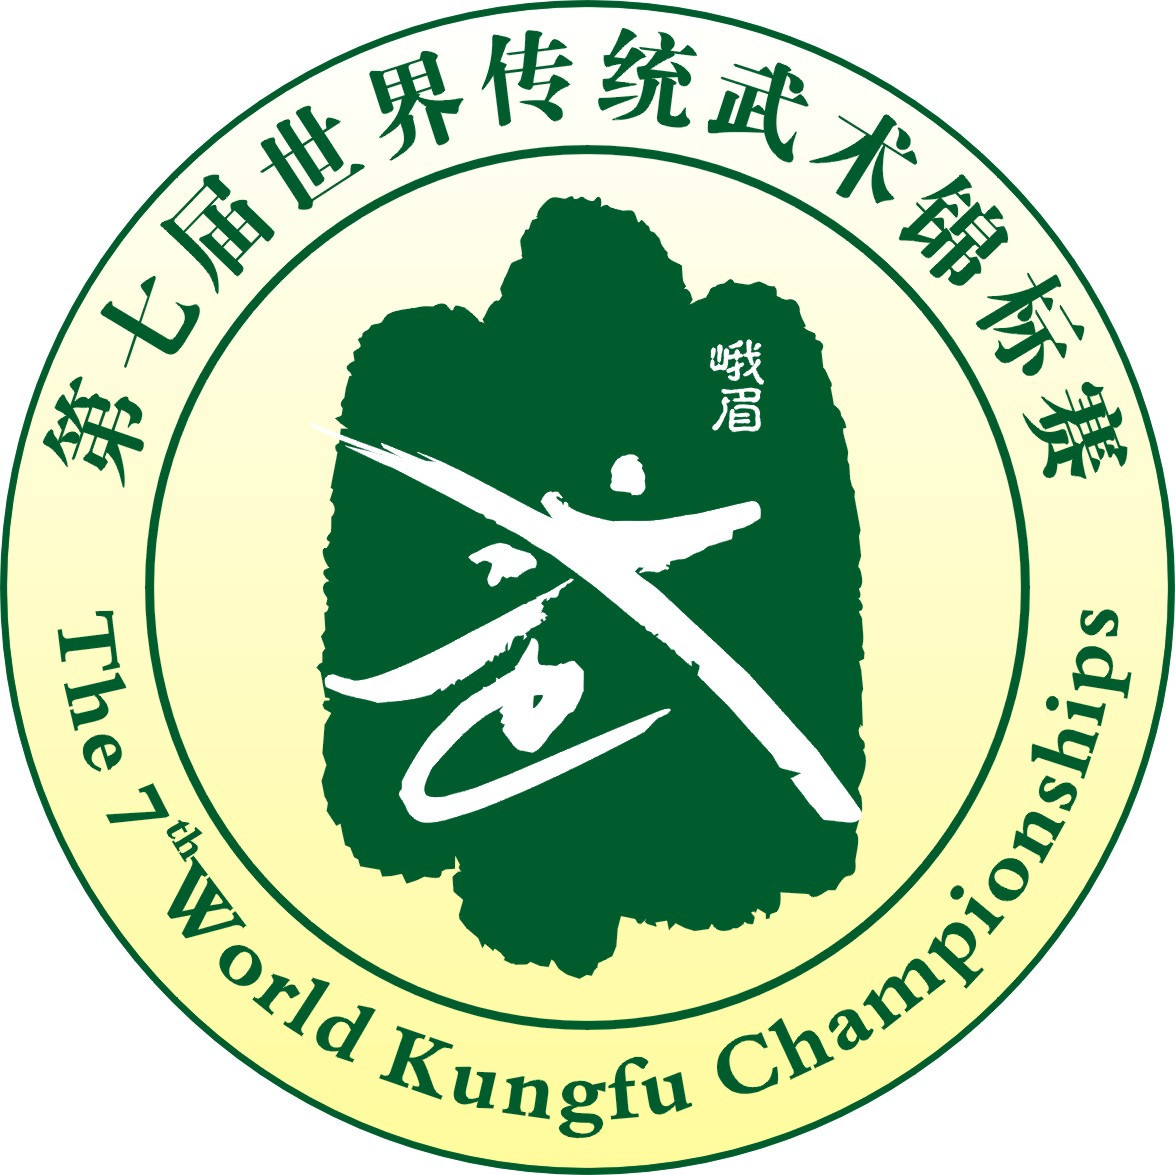 The logo for the 2017 World Kung-fu Championships is a dark green abstract depiction of the Chinese character "山" ©International Wushu Federation